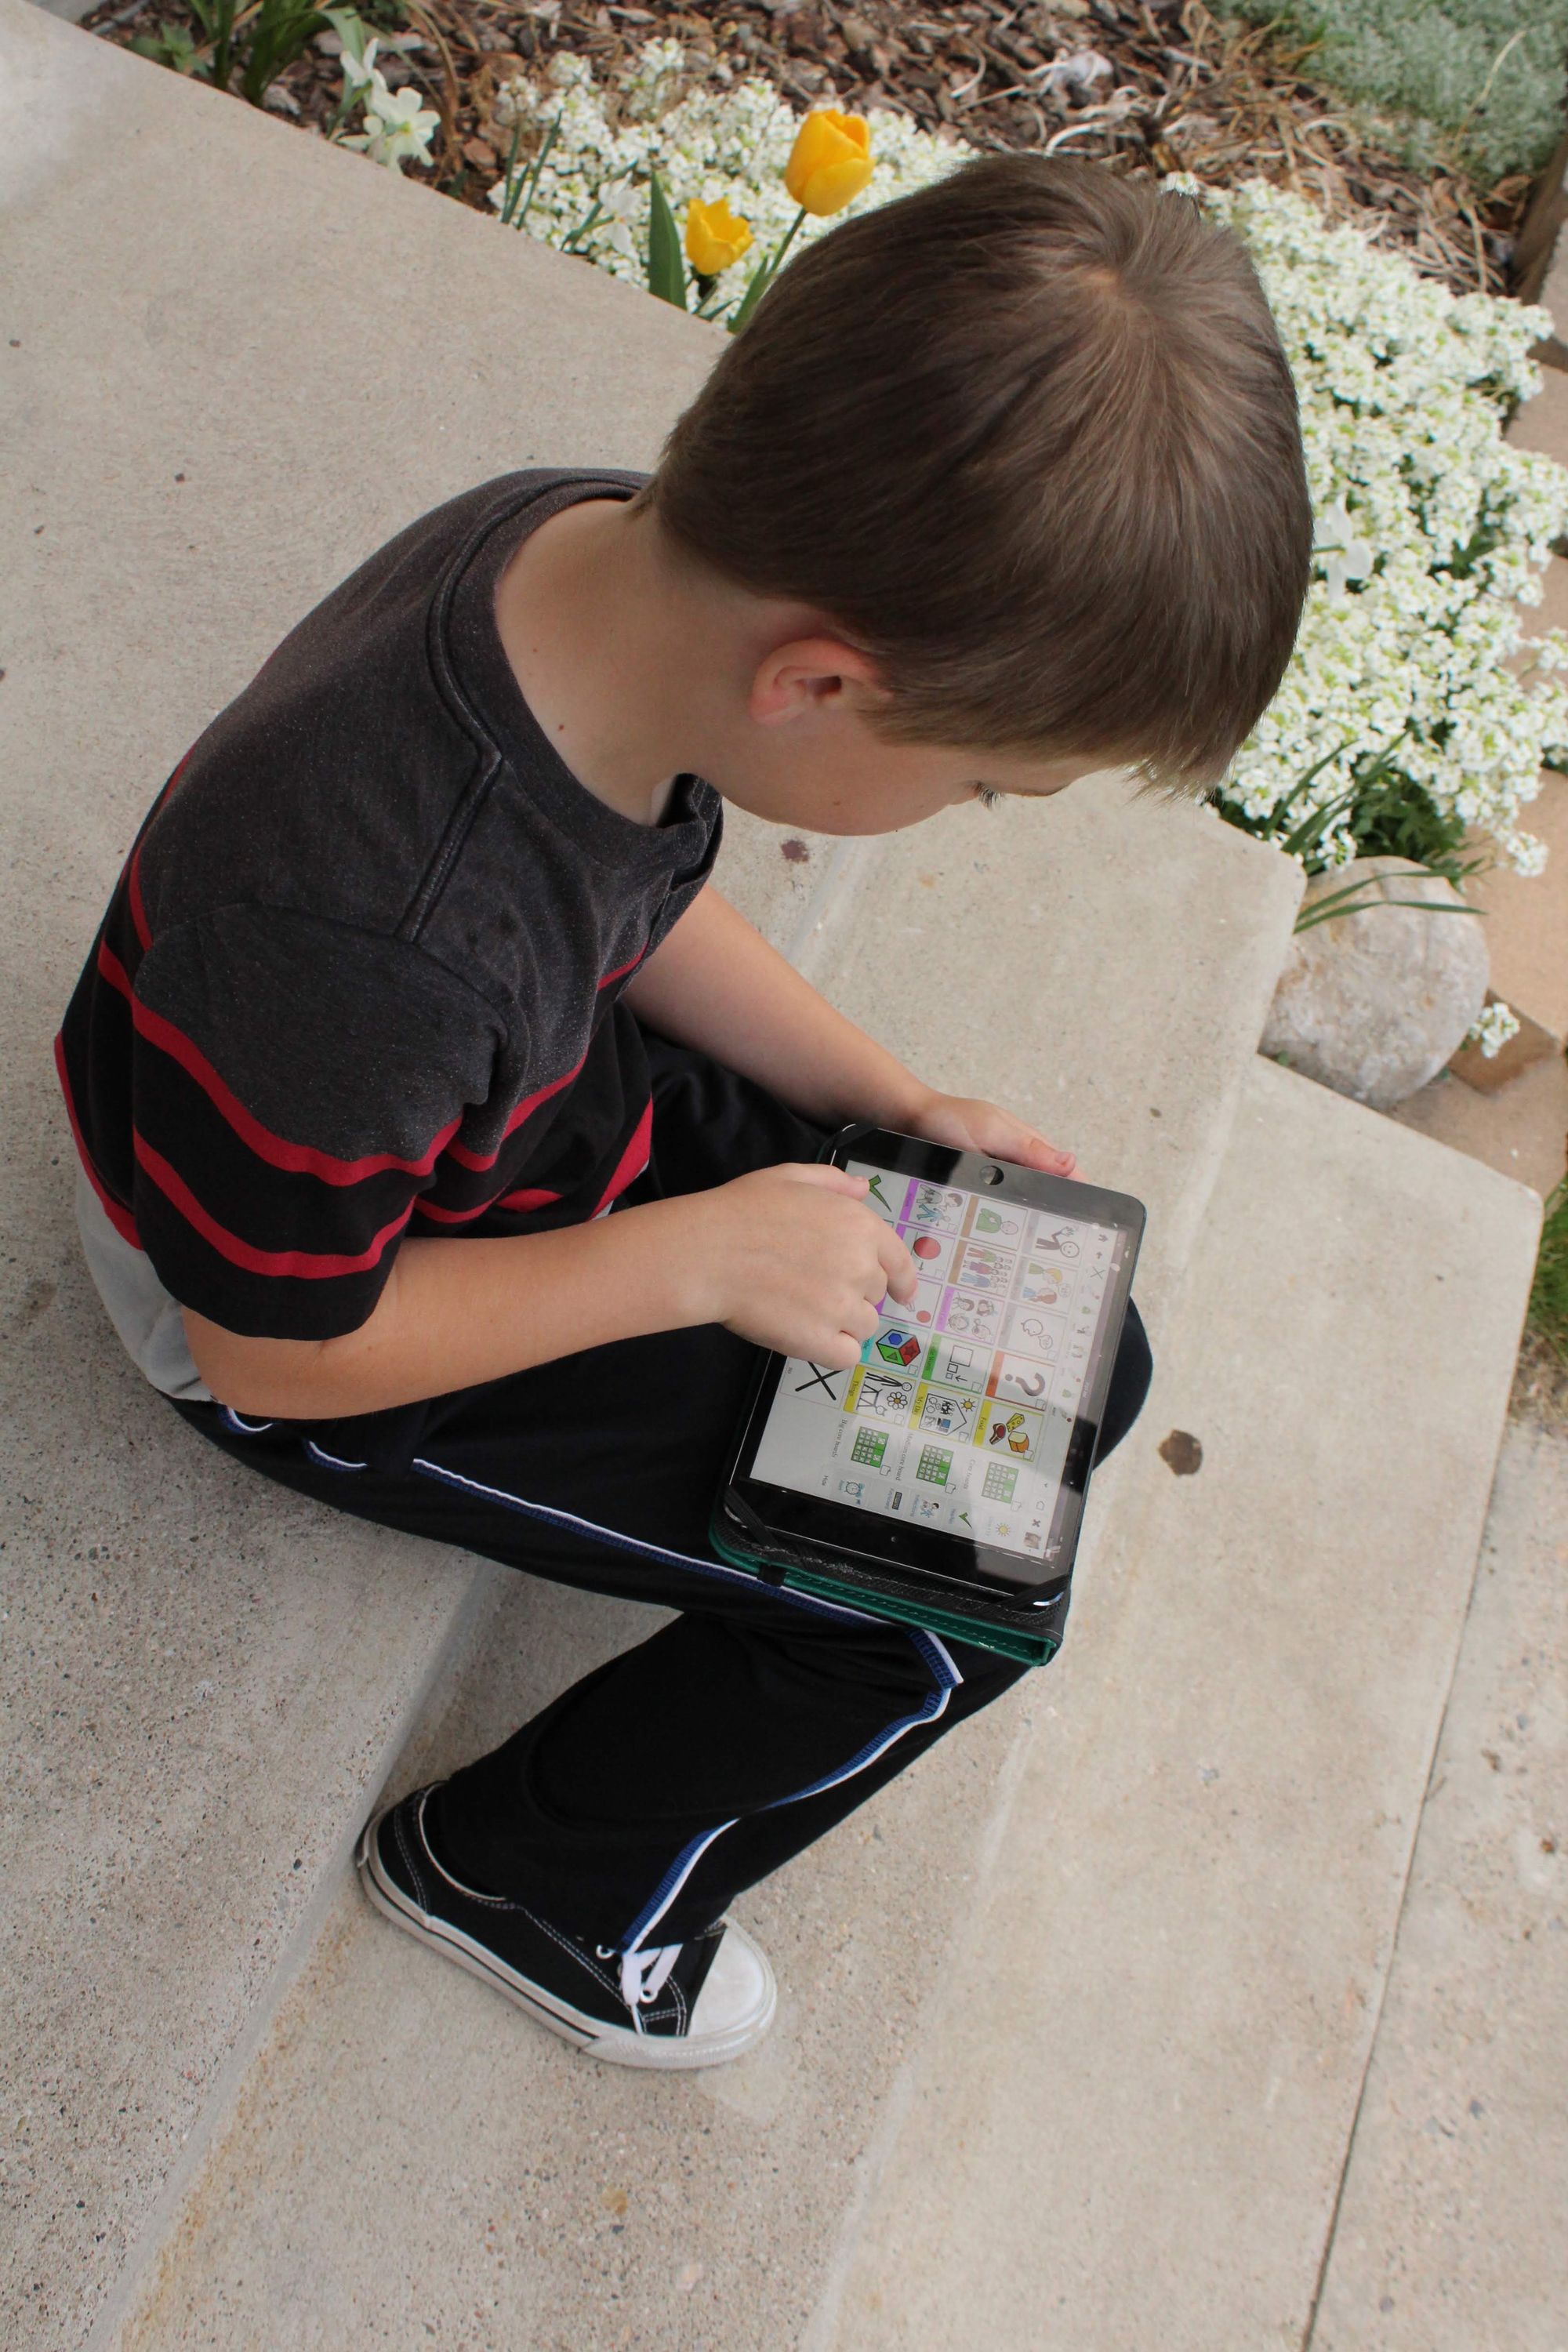 Young boy sits on cement steps with an AAC device in his lap as he presses button on the screen.